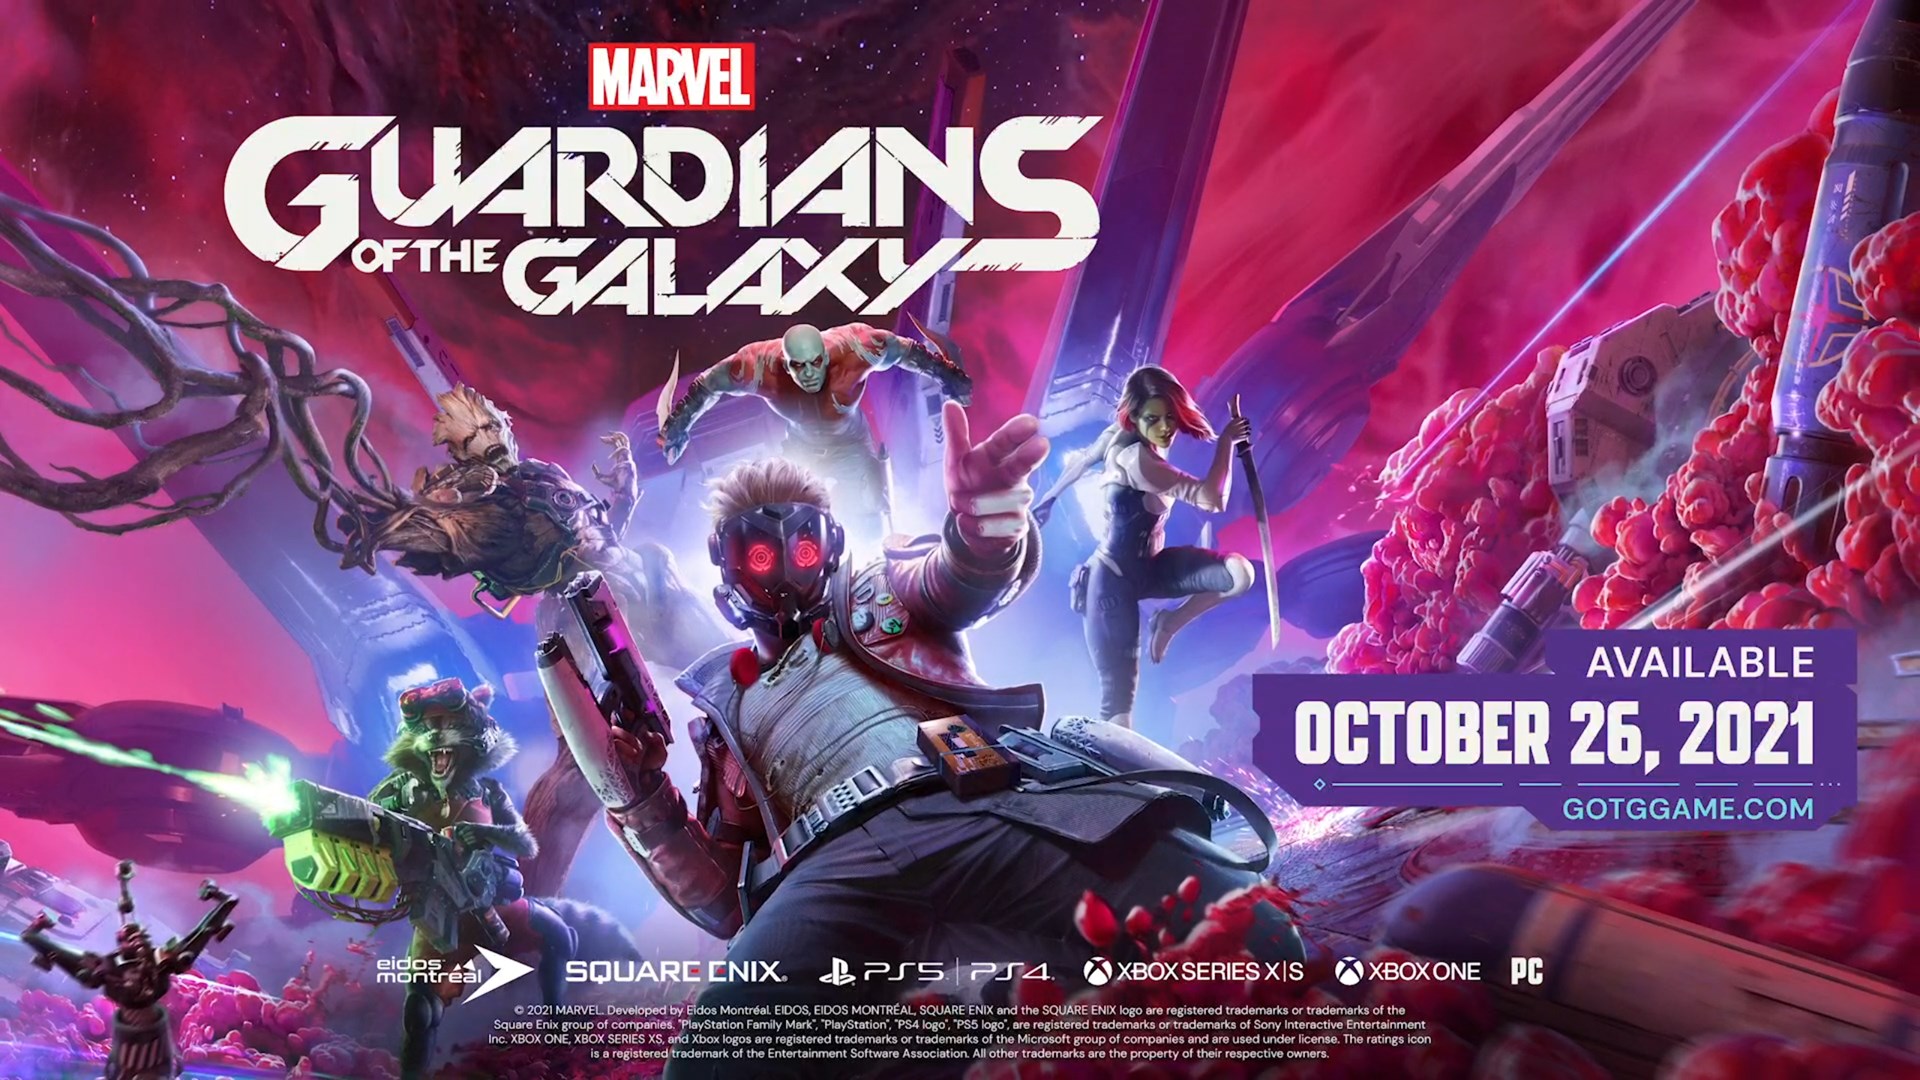 Square Enix reveals Guardians of the Galaxy